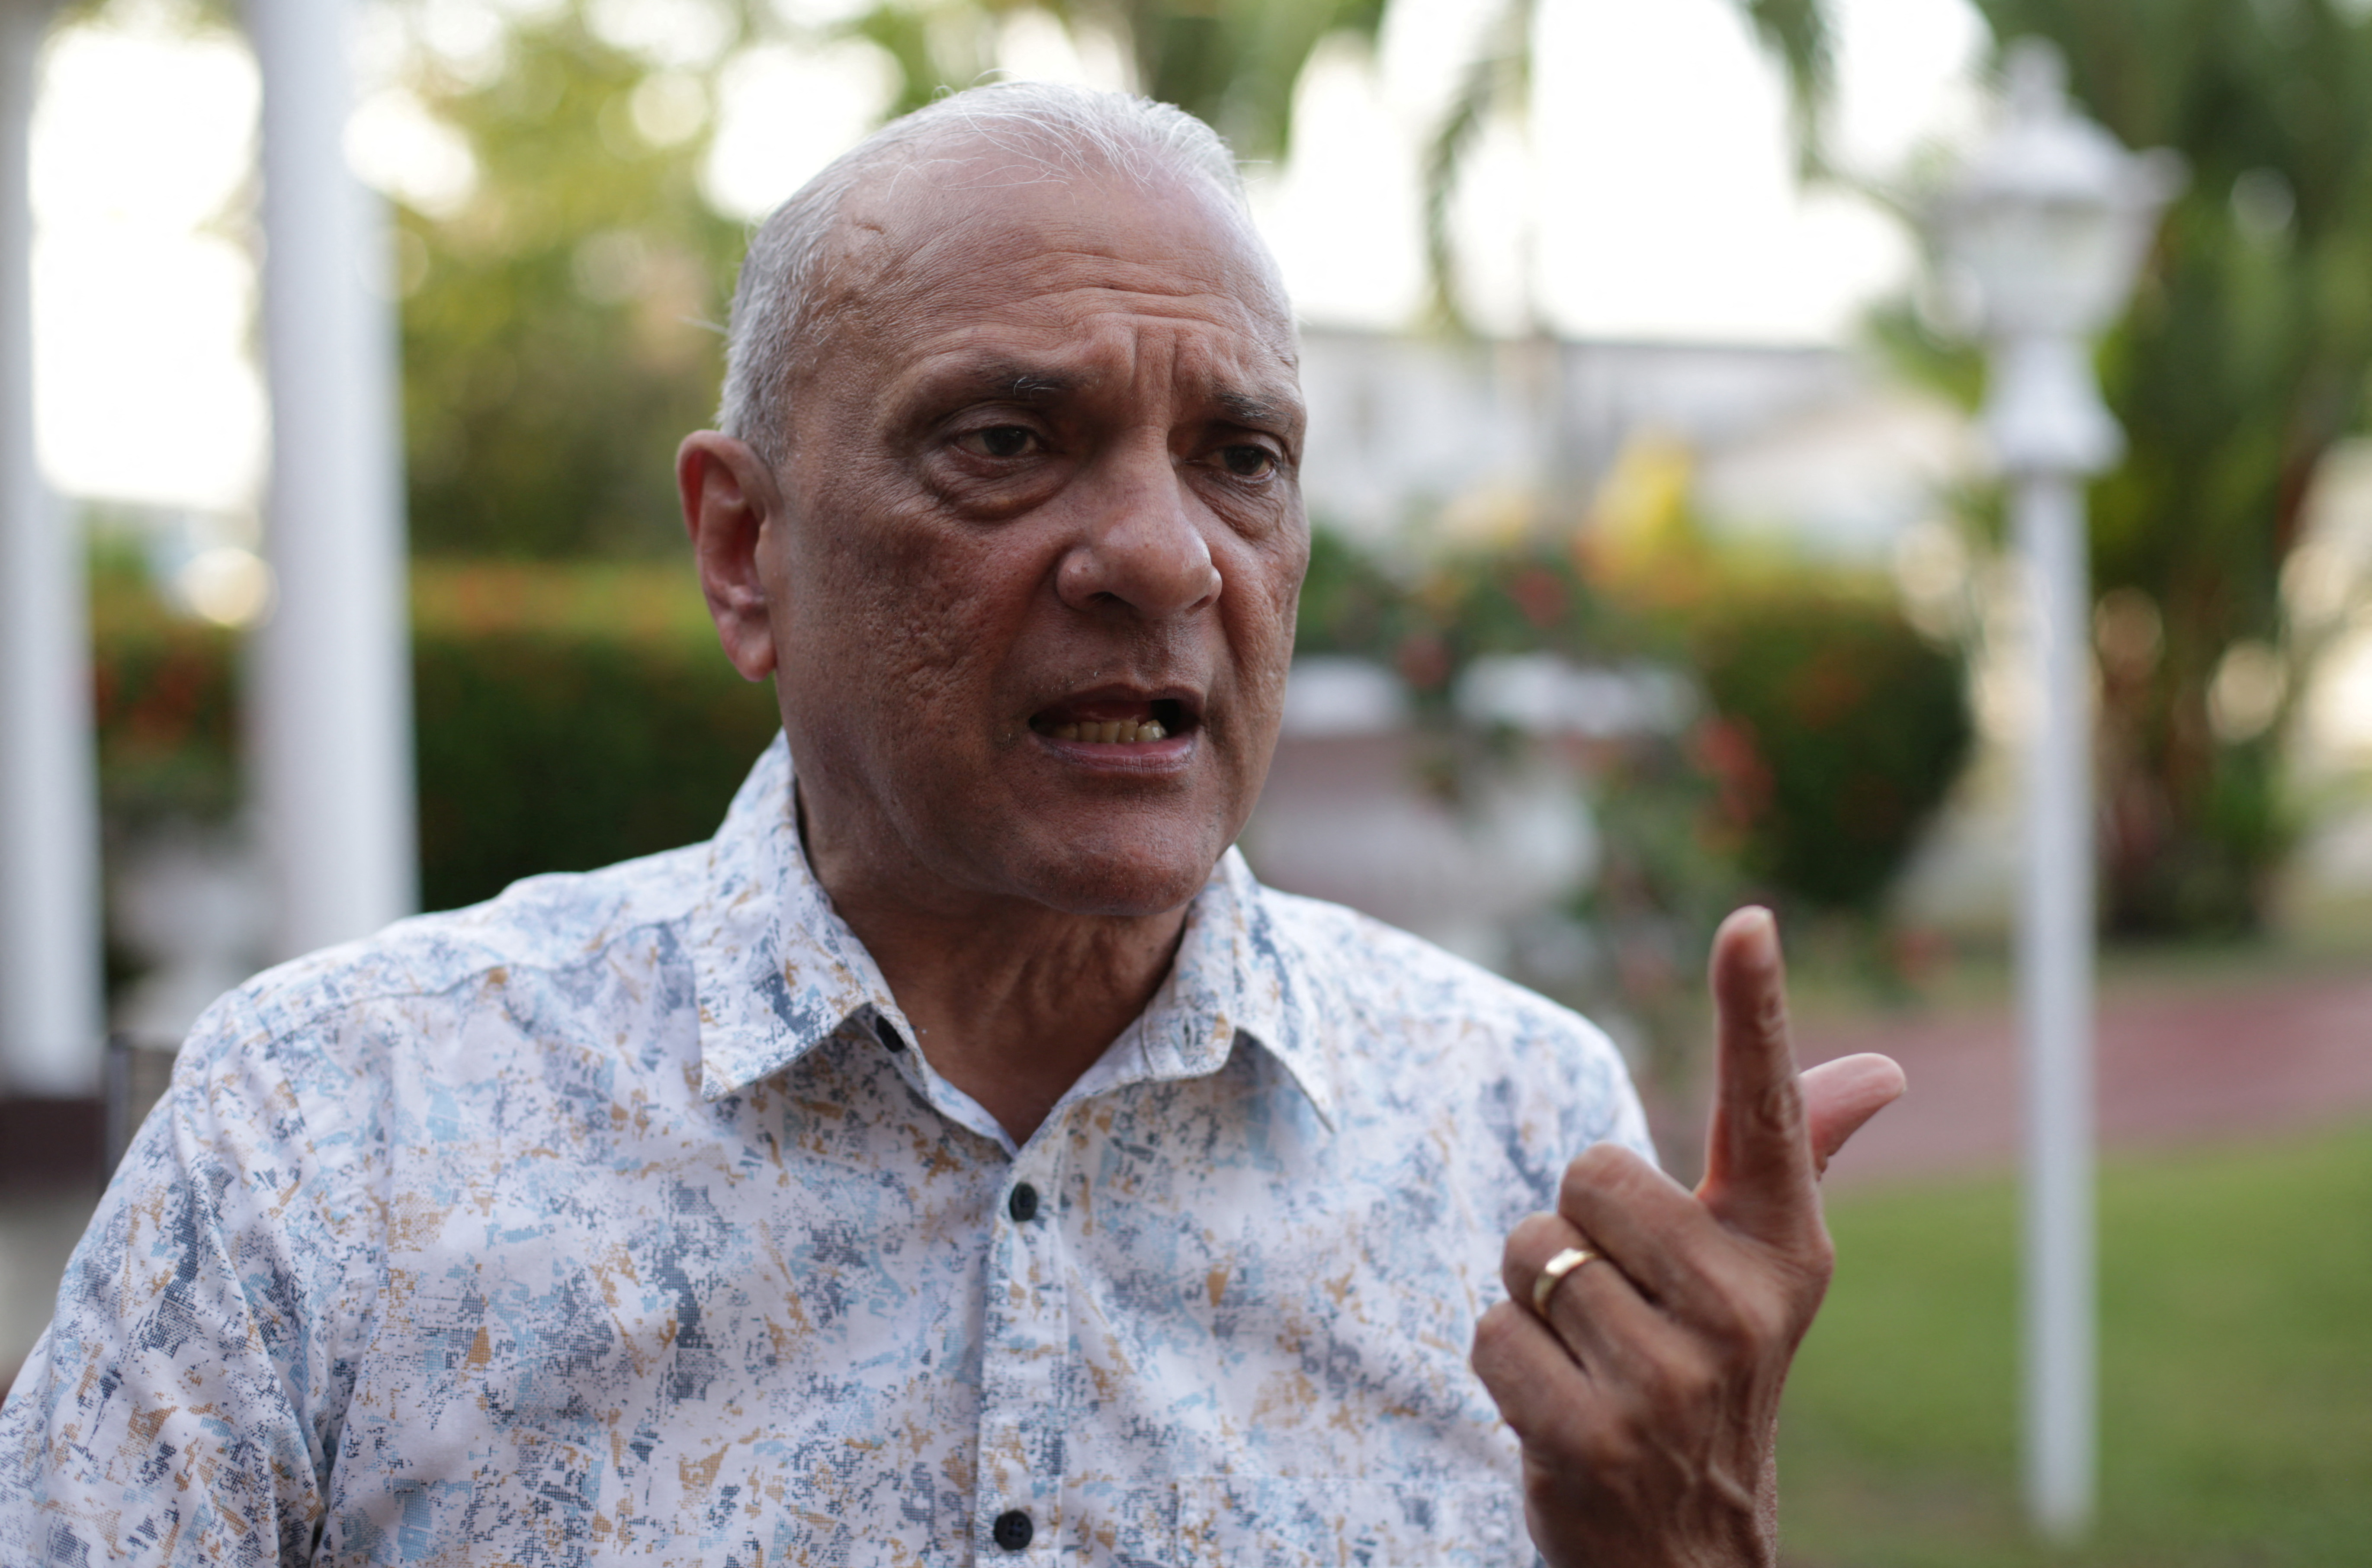 Hunt for Suriname's fugitive ex-president prolongs victims' suffering